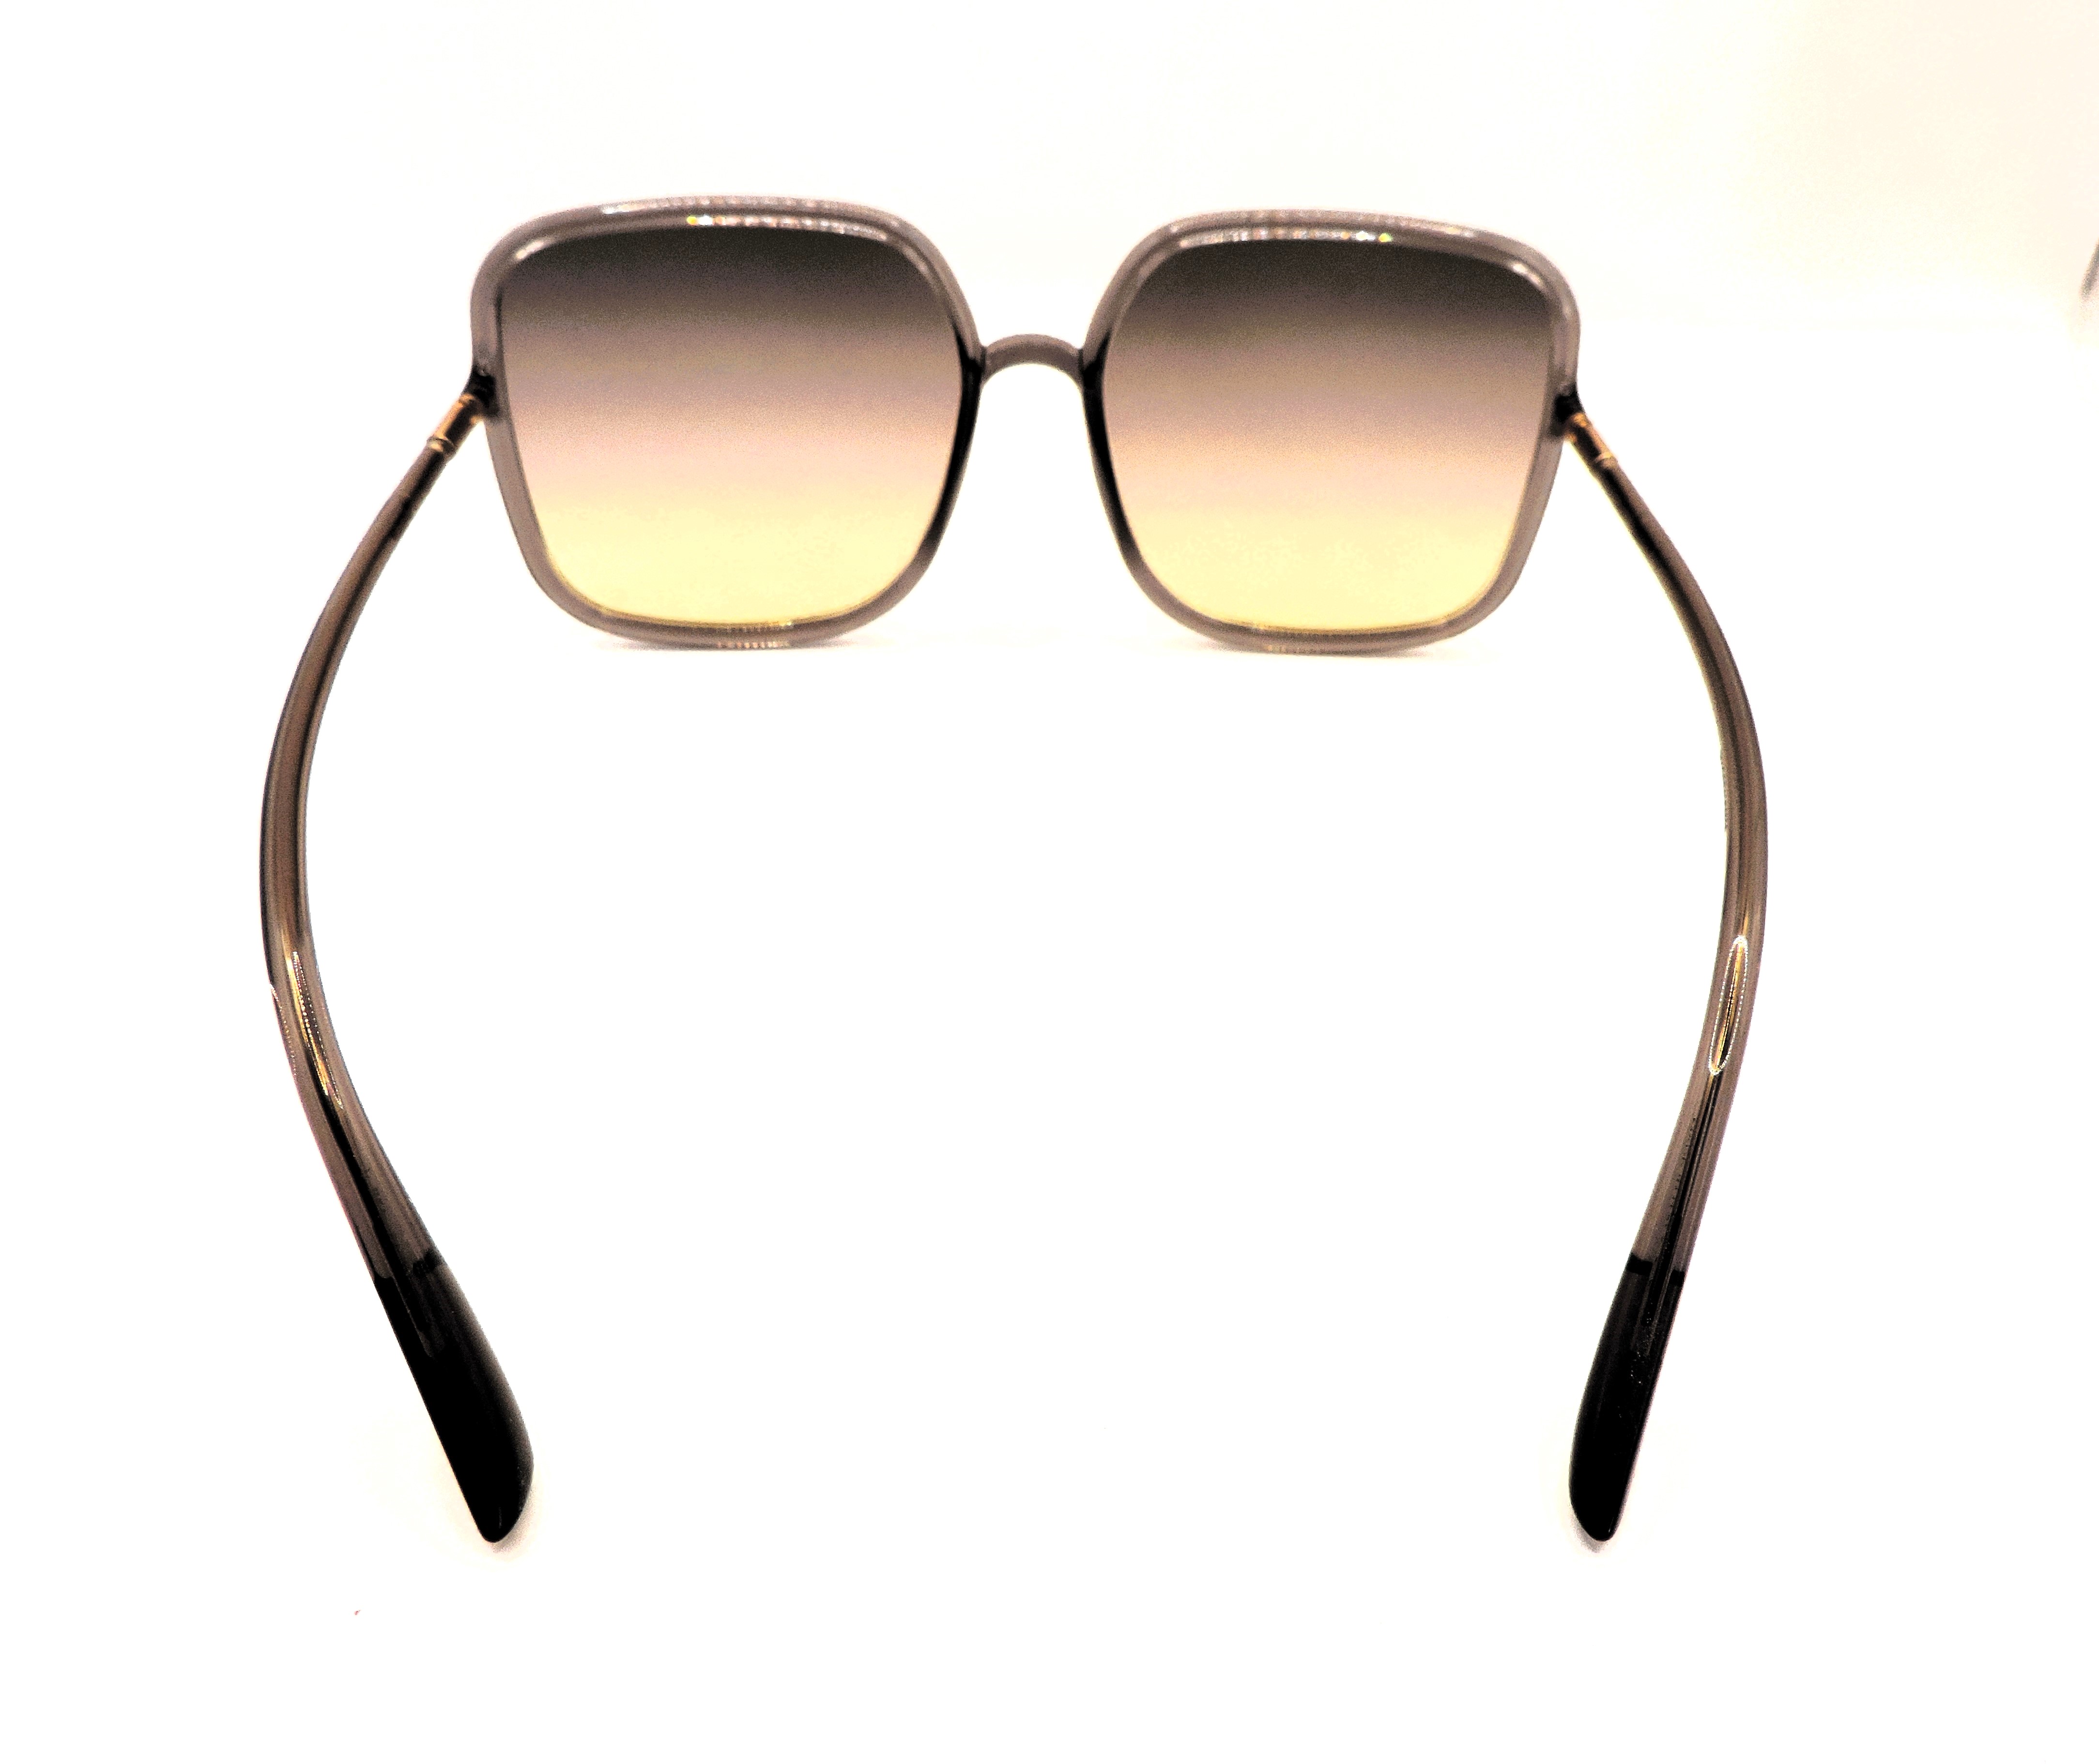 Christian Dior SoStellaire 1 Sunglasses New With Case - Image 8 of 11